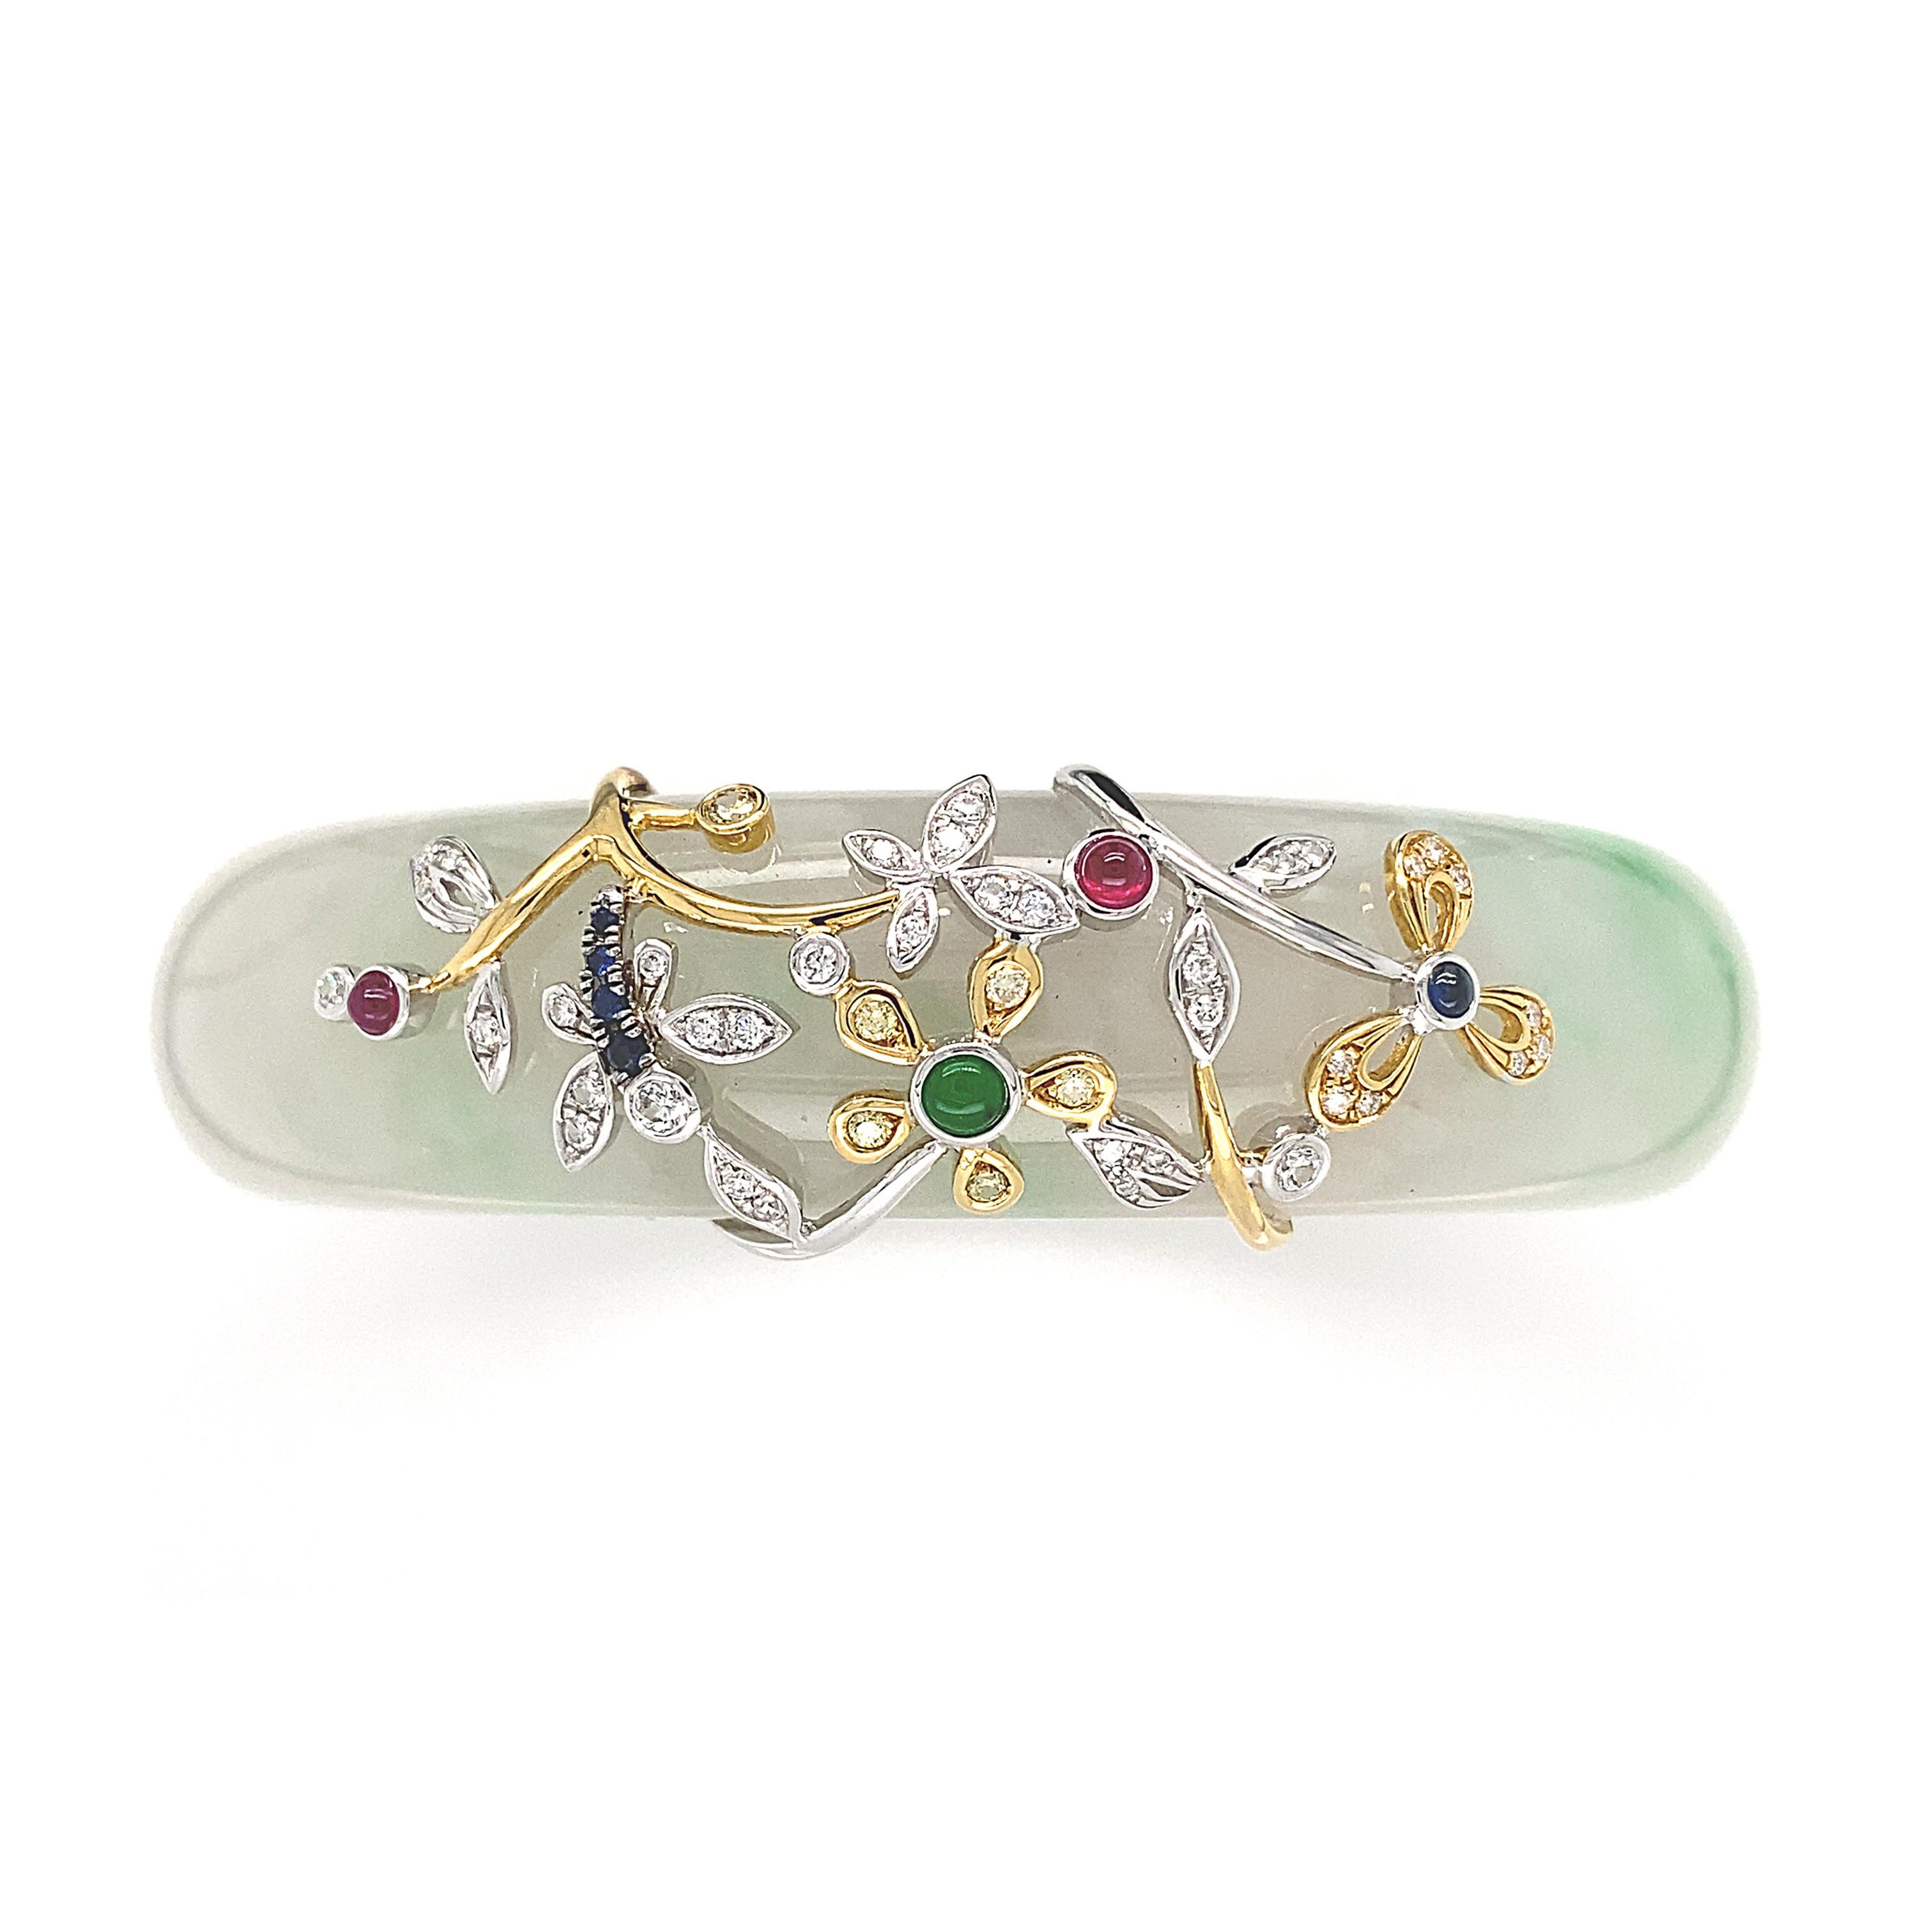 The House of Dilys’ presents – the Jade 'Botanica' Bangle. To highlight the icy lustre and veins of green, characteristic to this natural jade piece that weighs 329.77cts, the bangle is adorned with an enchanting flower garland in 18K White Gold and